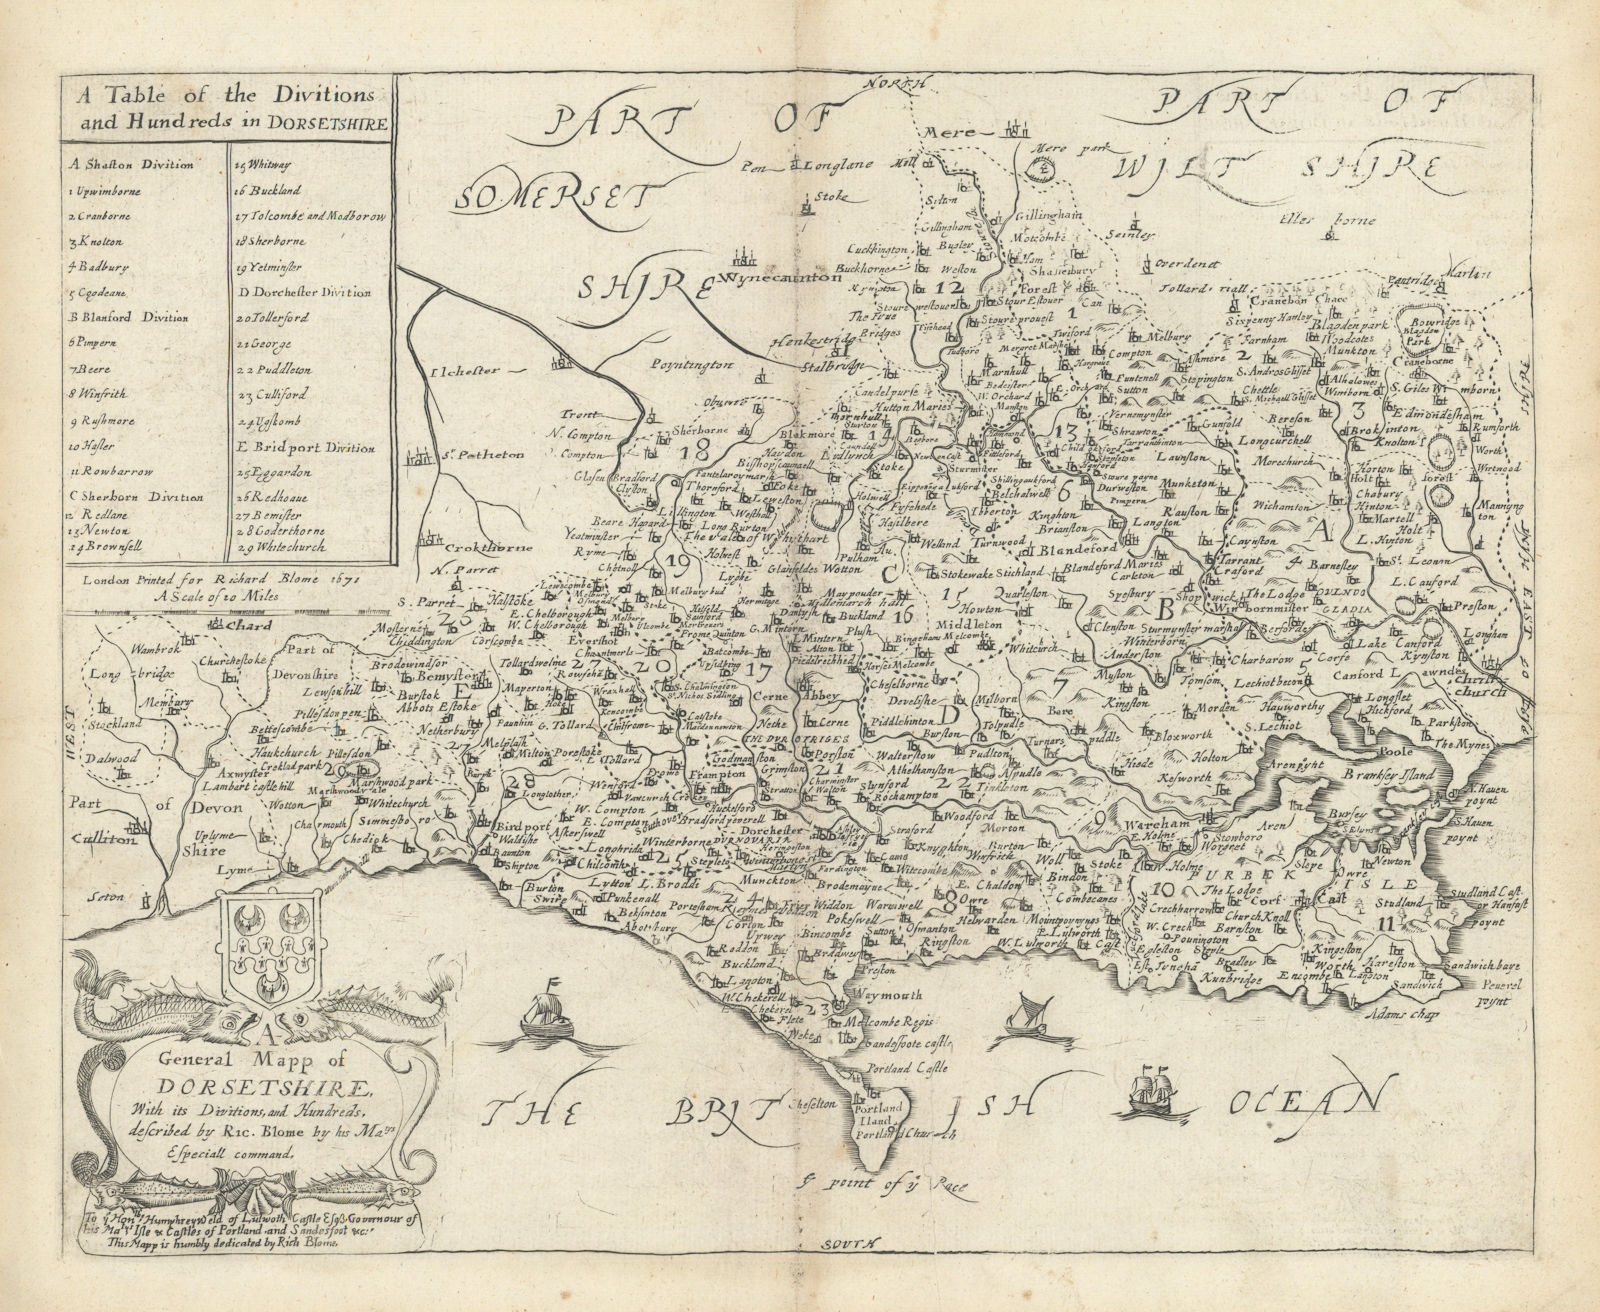 A General Map of Dorsetshire, with its Divitions… by Richard Blome 1673